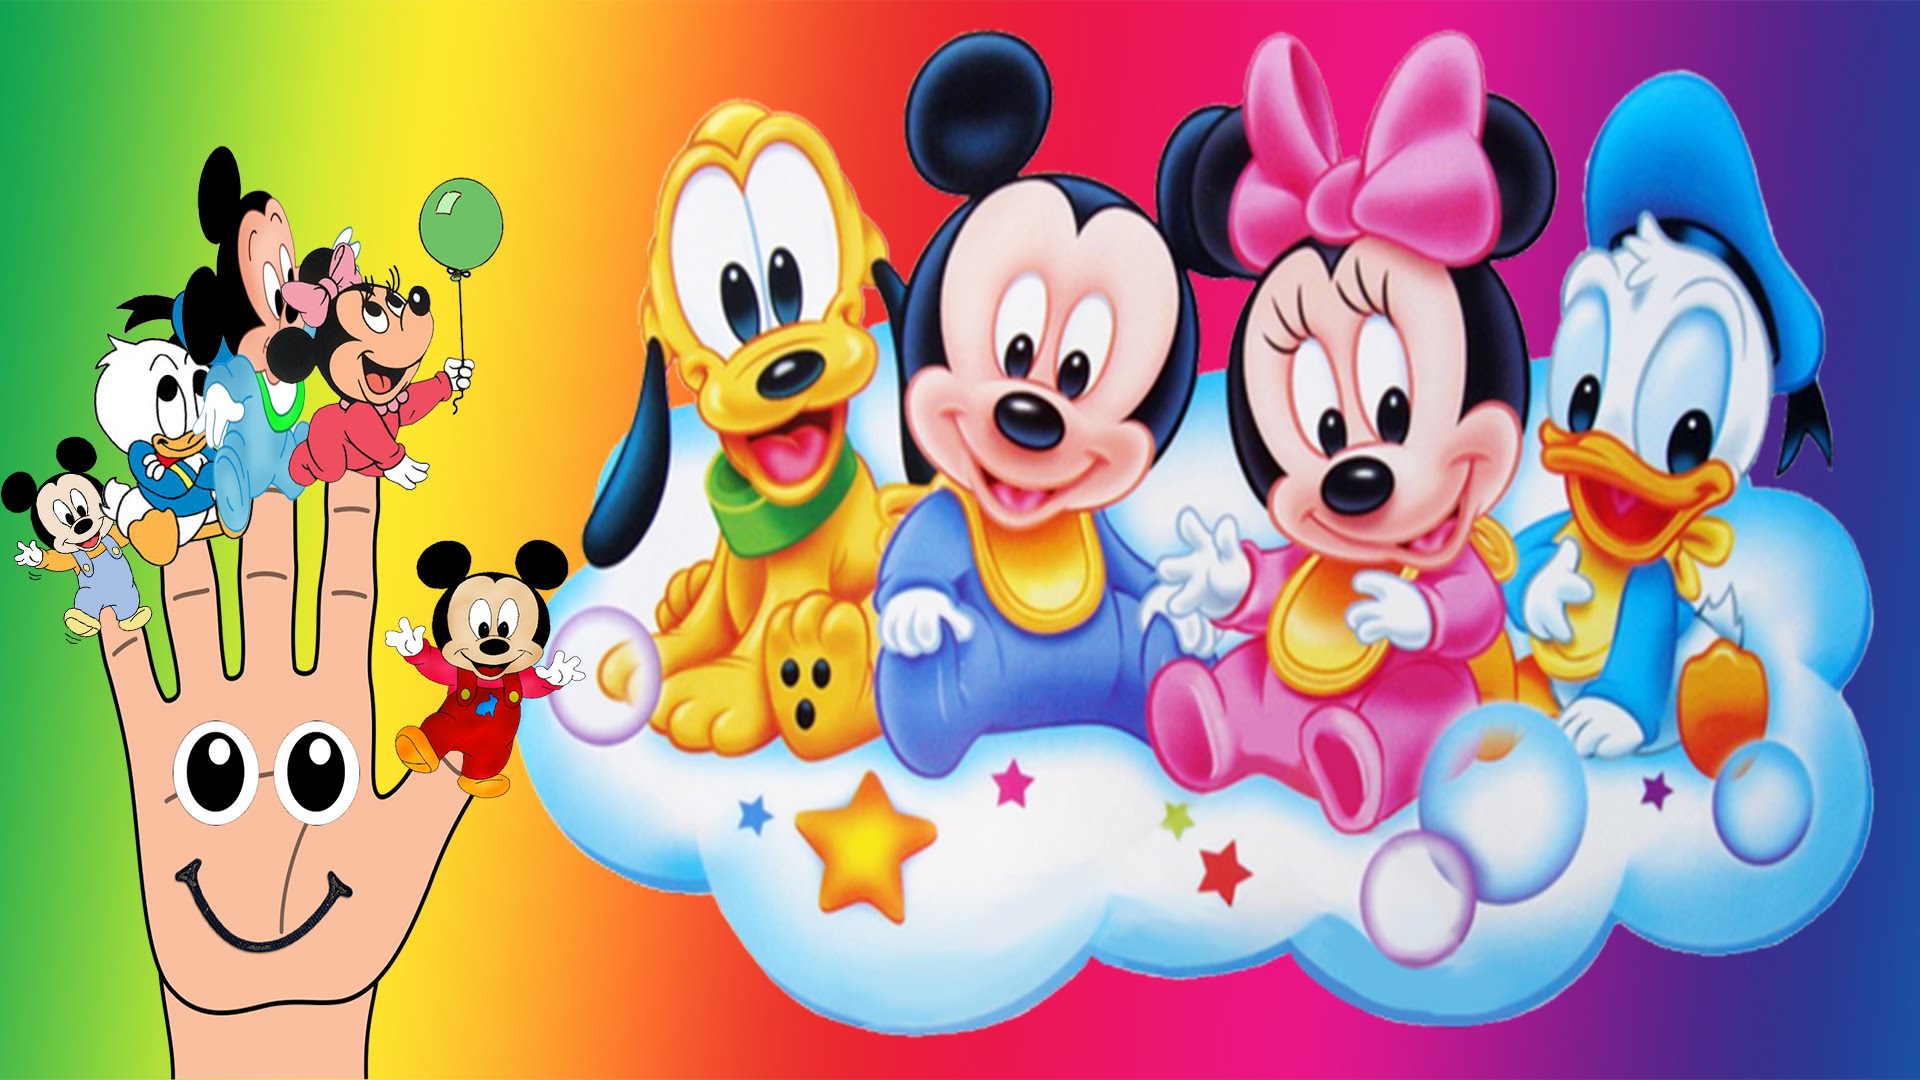 Adorable Baby, Mickey Mouse, Pluto, Minnie Donald Duck - Baby Mickey Mouse And Minnie Mouse - HD Wallpaper 